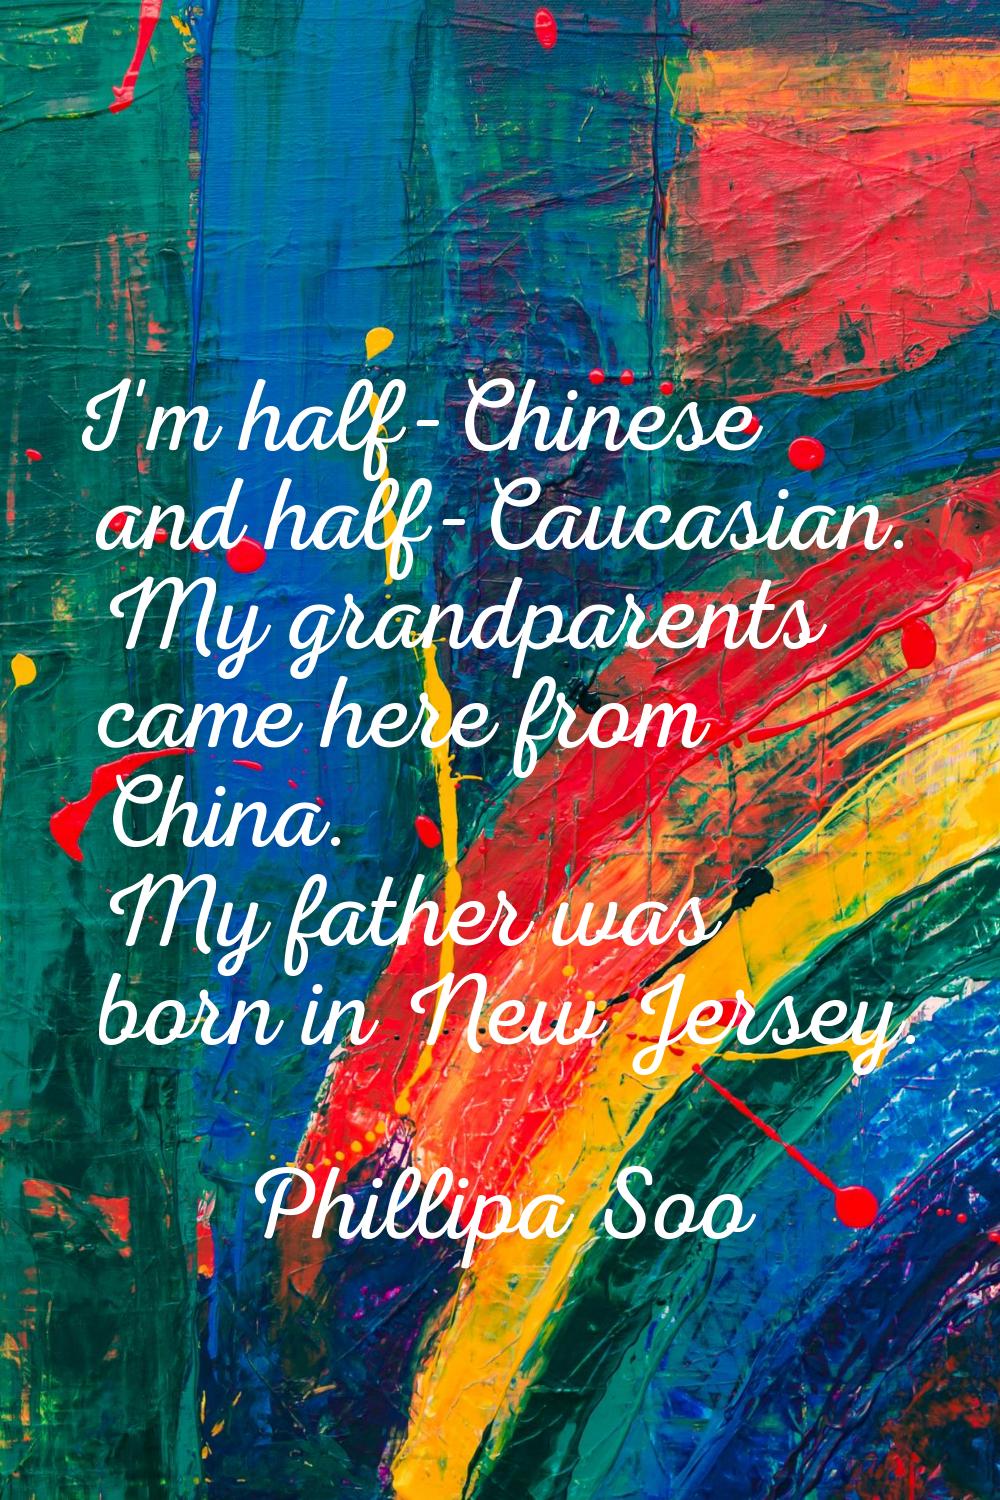 I'm half-Chinese and half-Caucasian. My grandparents came here from China. My father was born in Ne